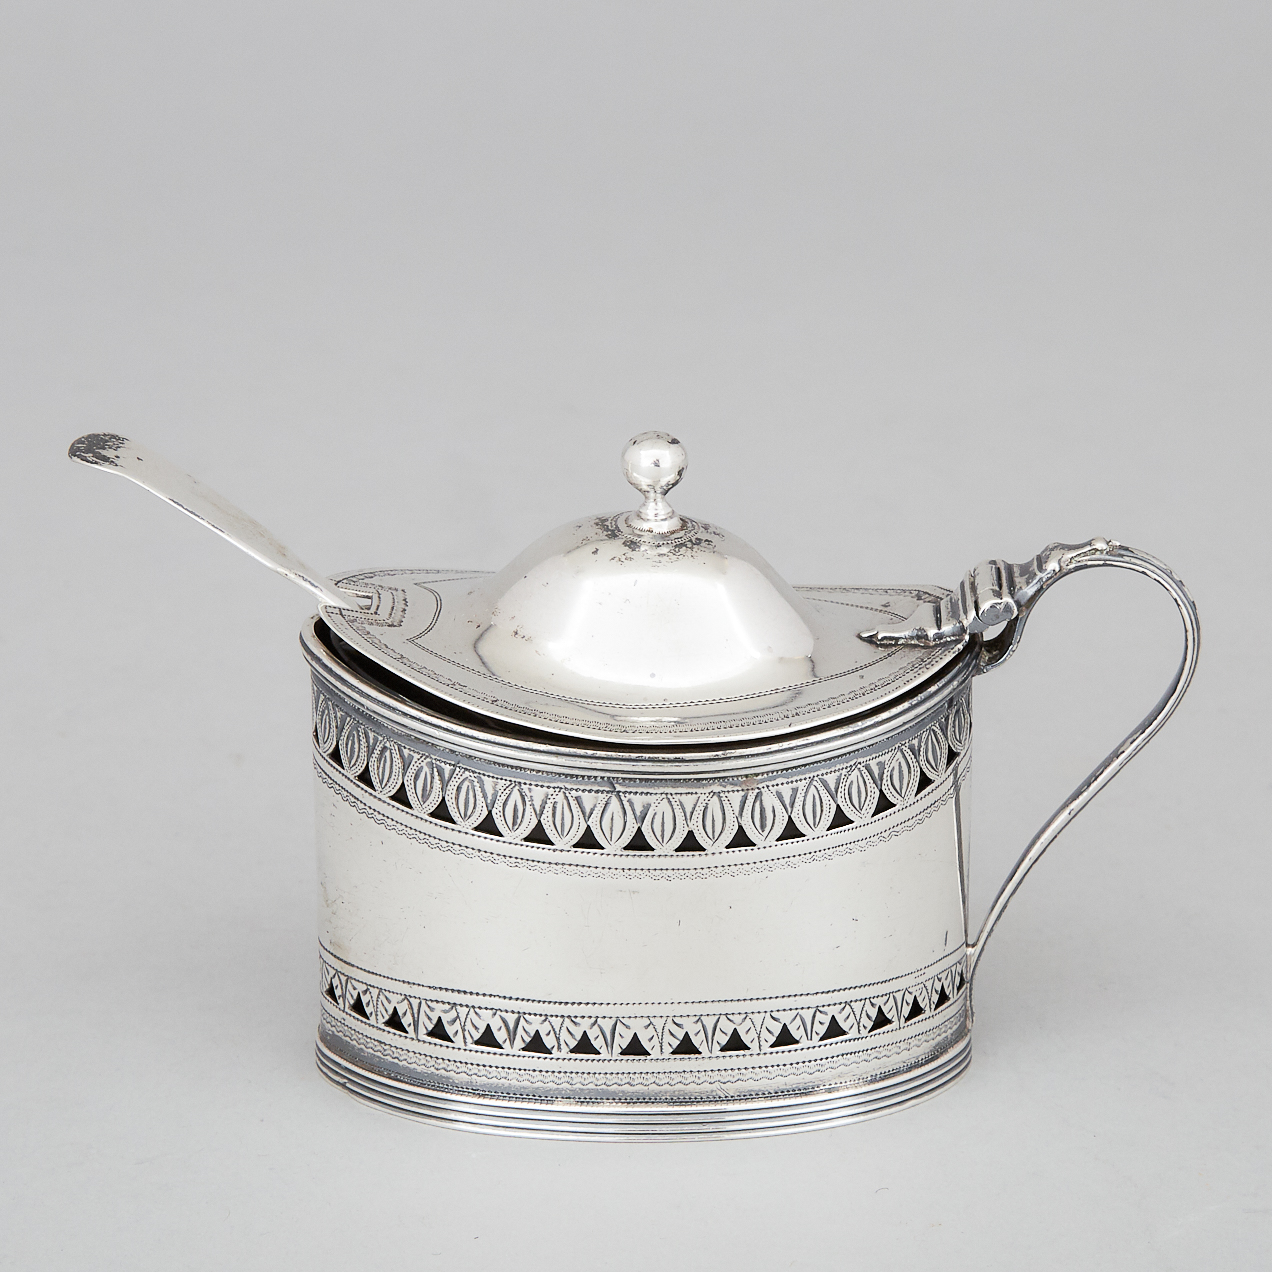 George III Silver Pierced and Engraved Oval Mustard Pot, Robert Hennell I, London, 1792